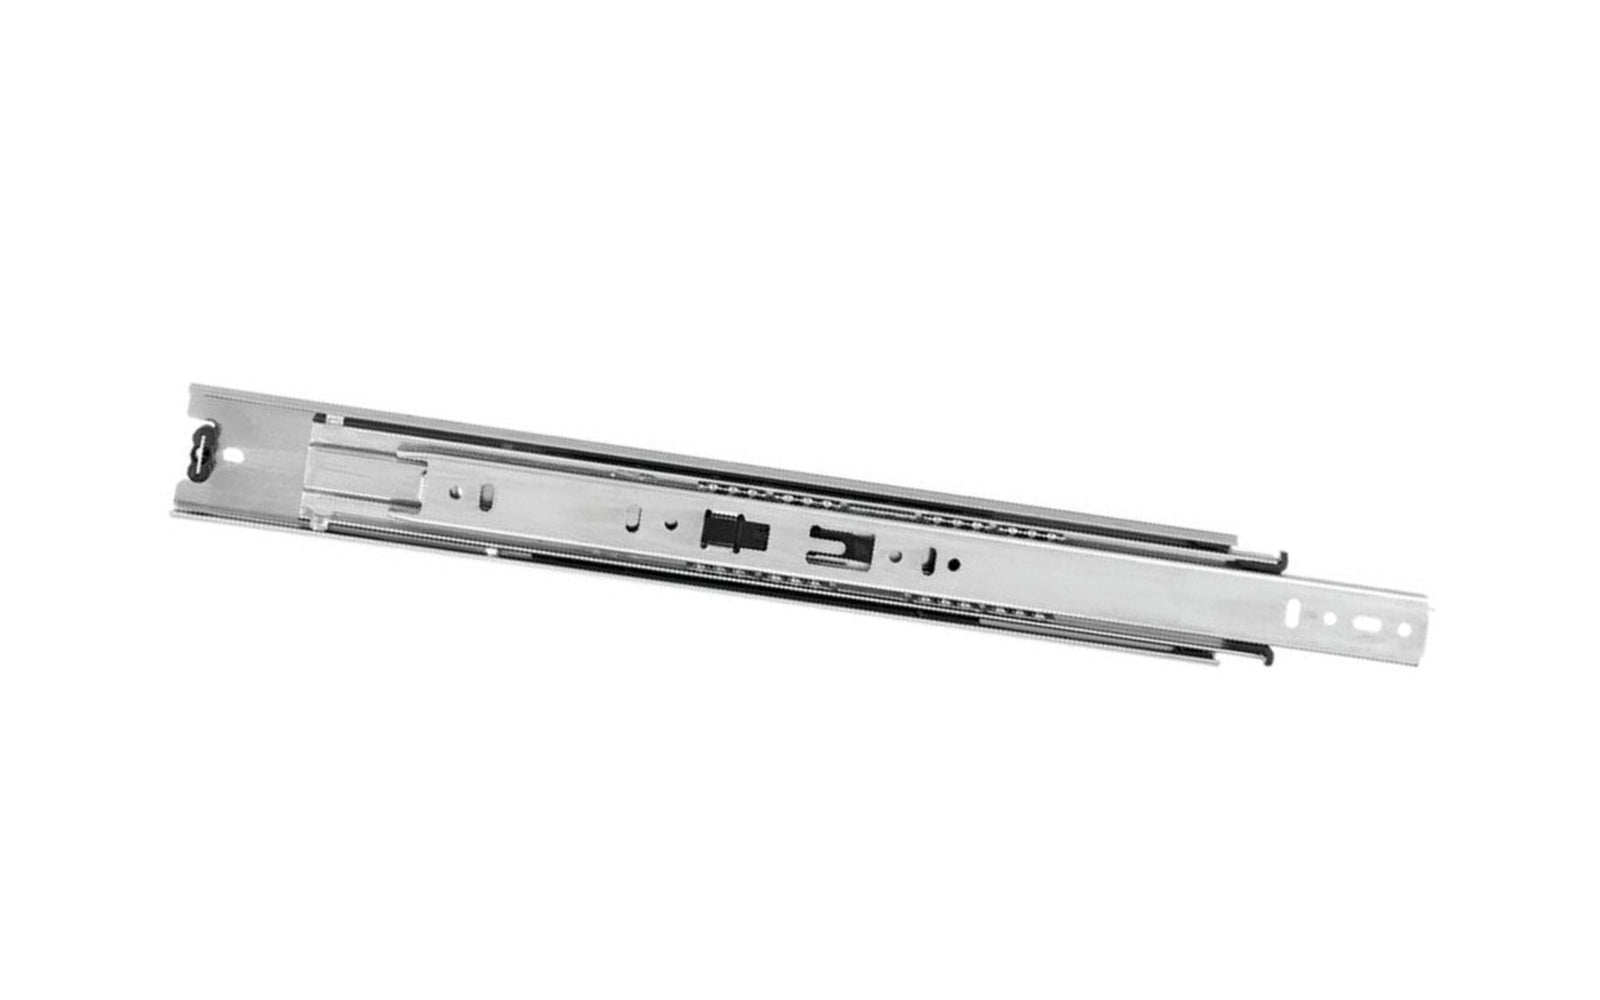 The Knape & Vogt TT150 Soft-Close Drawer Slide is a full extension soft-close, ball-bearing slide that features a lever disconnect. The TT150 is perfect for light-duty kitchen and bath cabinetry that require a soft-close feature.